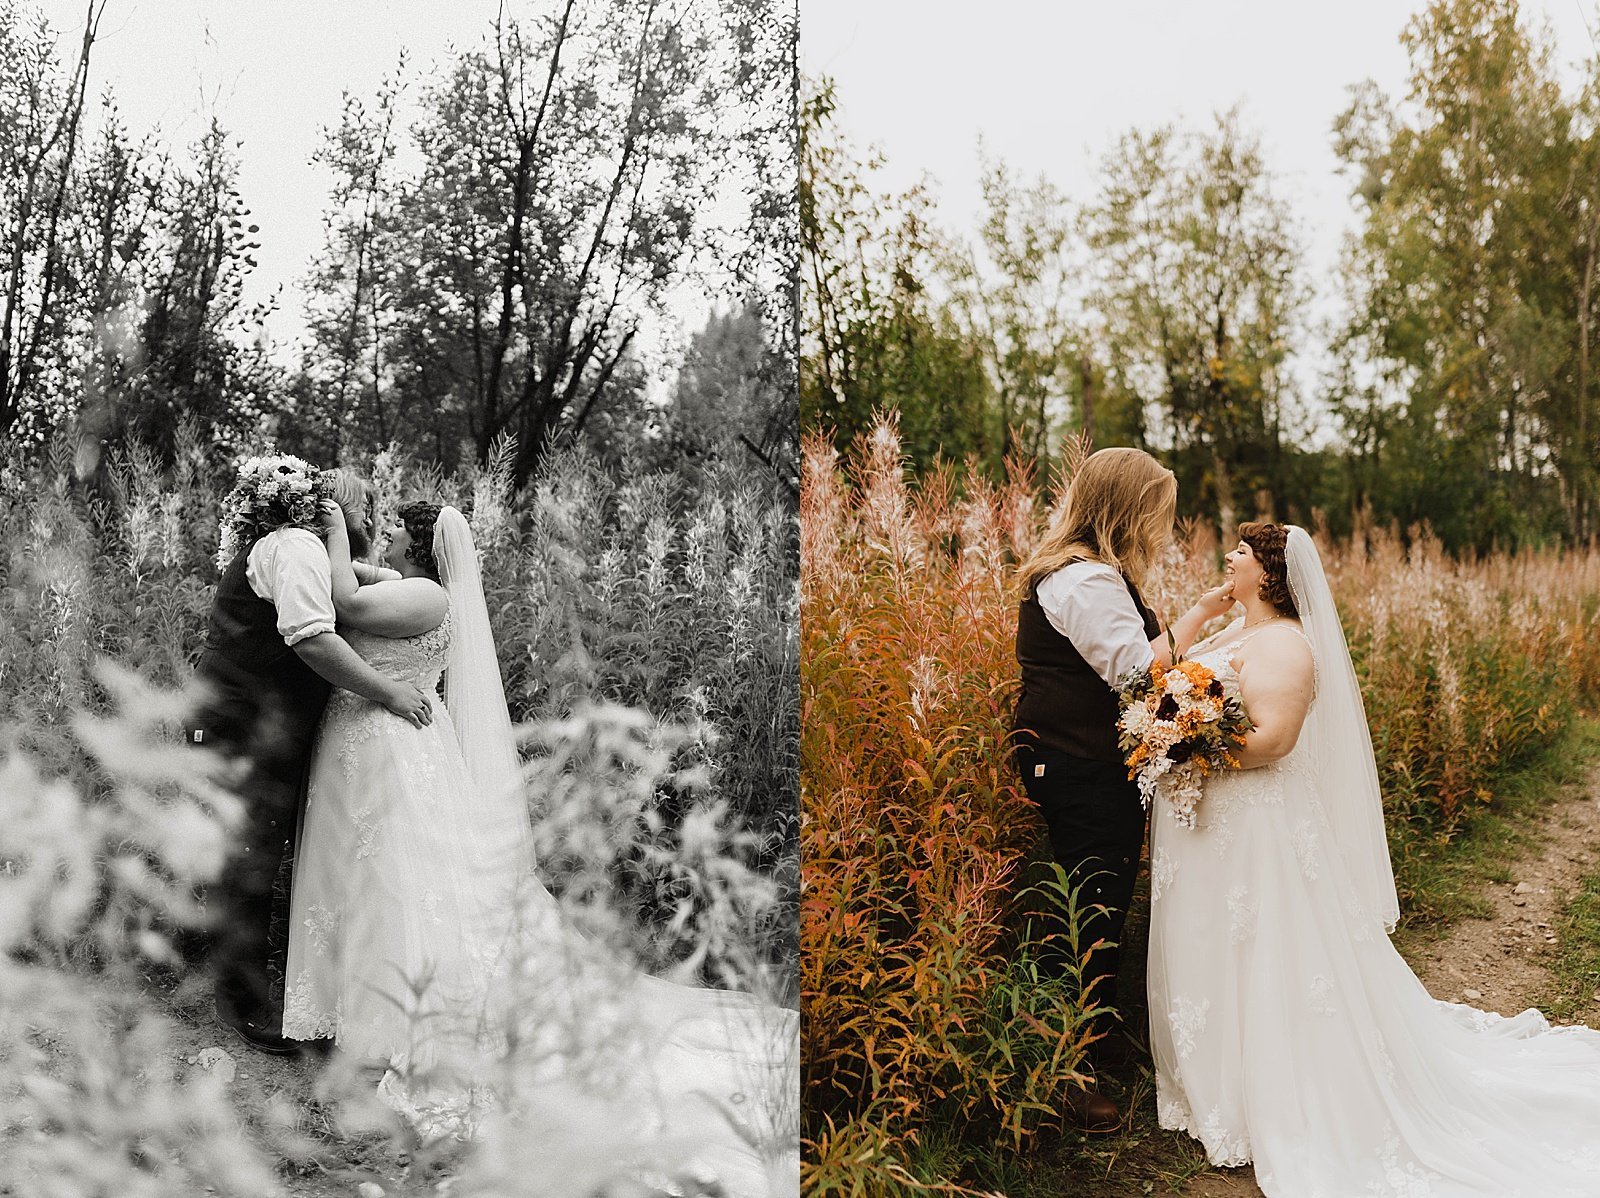  Newlyweds embracing in a field after their micro wedding in Alaska 